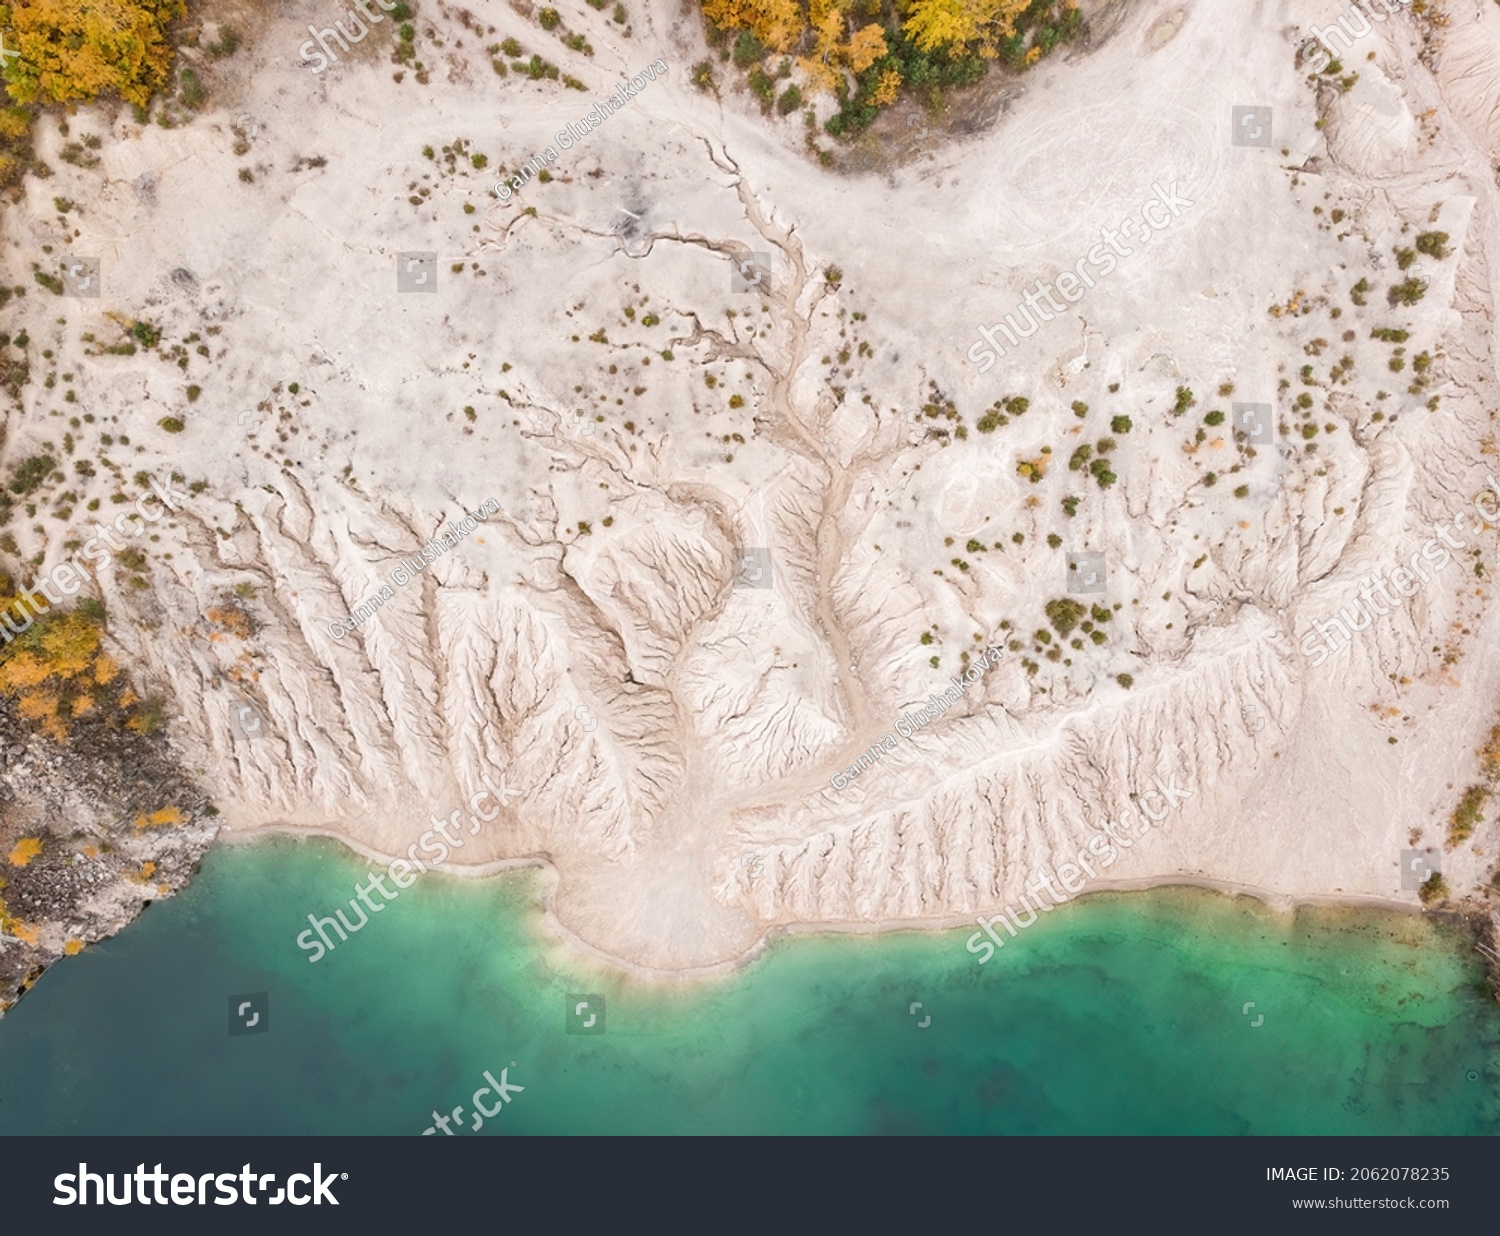 Rough texture of erosion in abandoned quarry, curves and smooth cuts resulting from the erosive effect of water, erosional water formation., abandoned and flooded quarry #2062078235